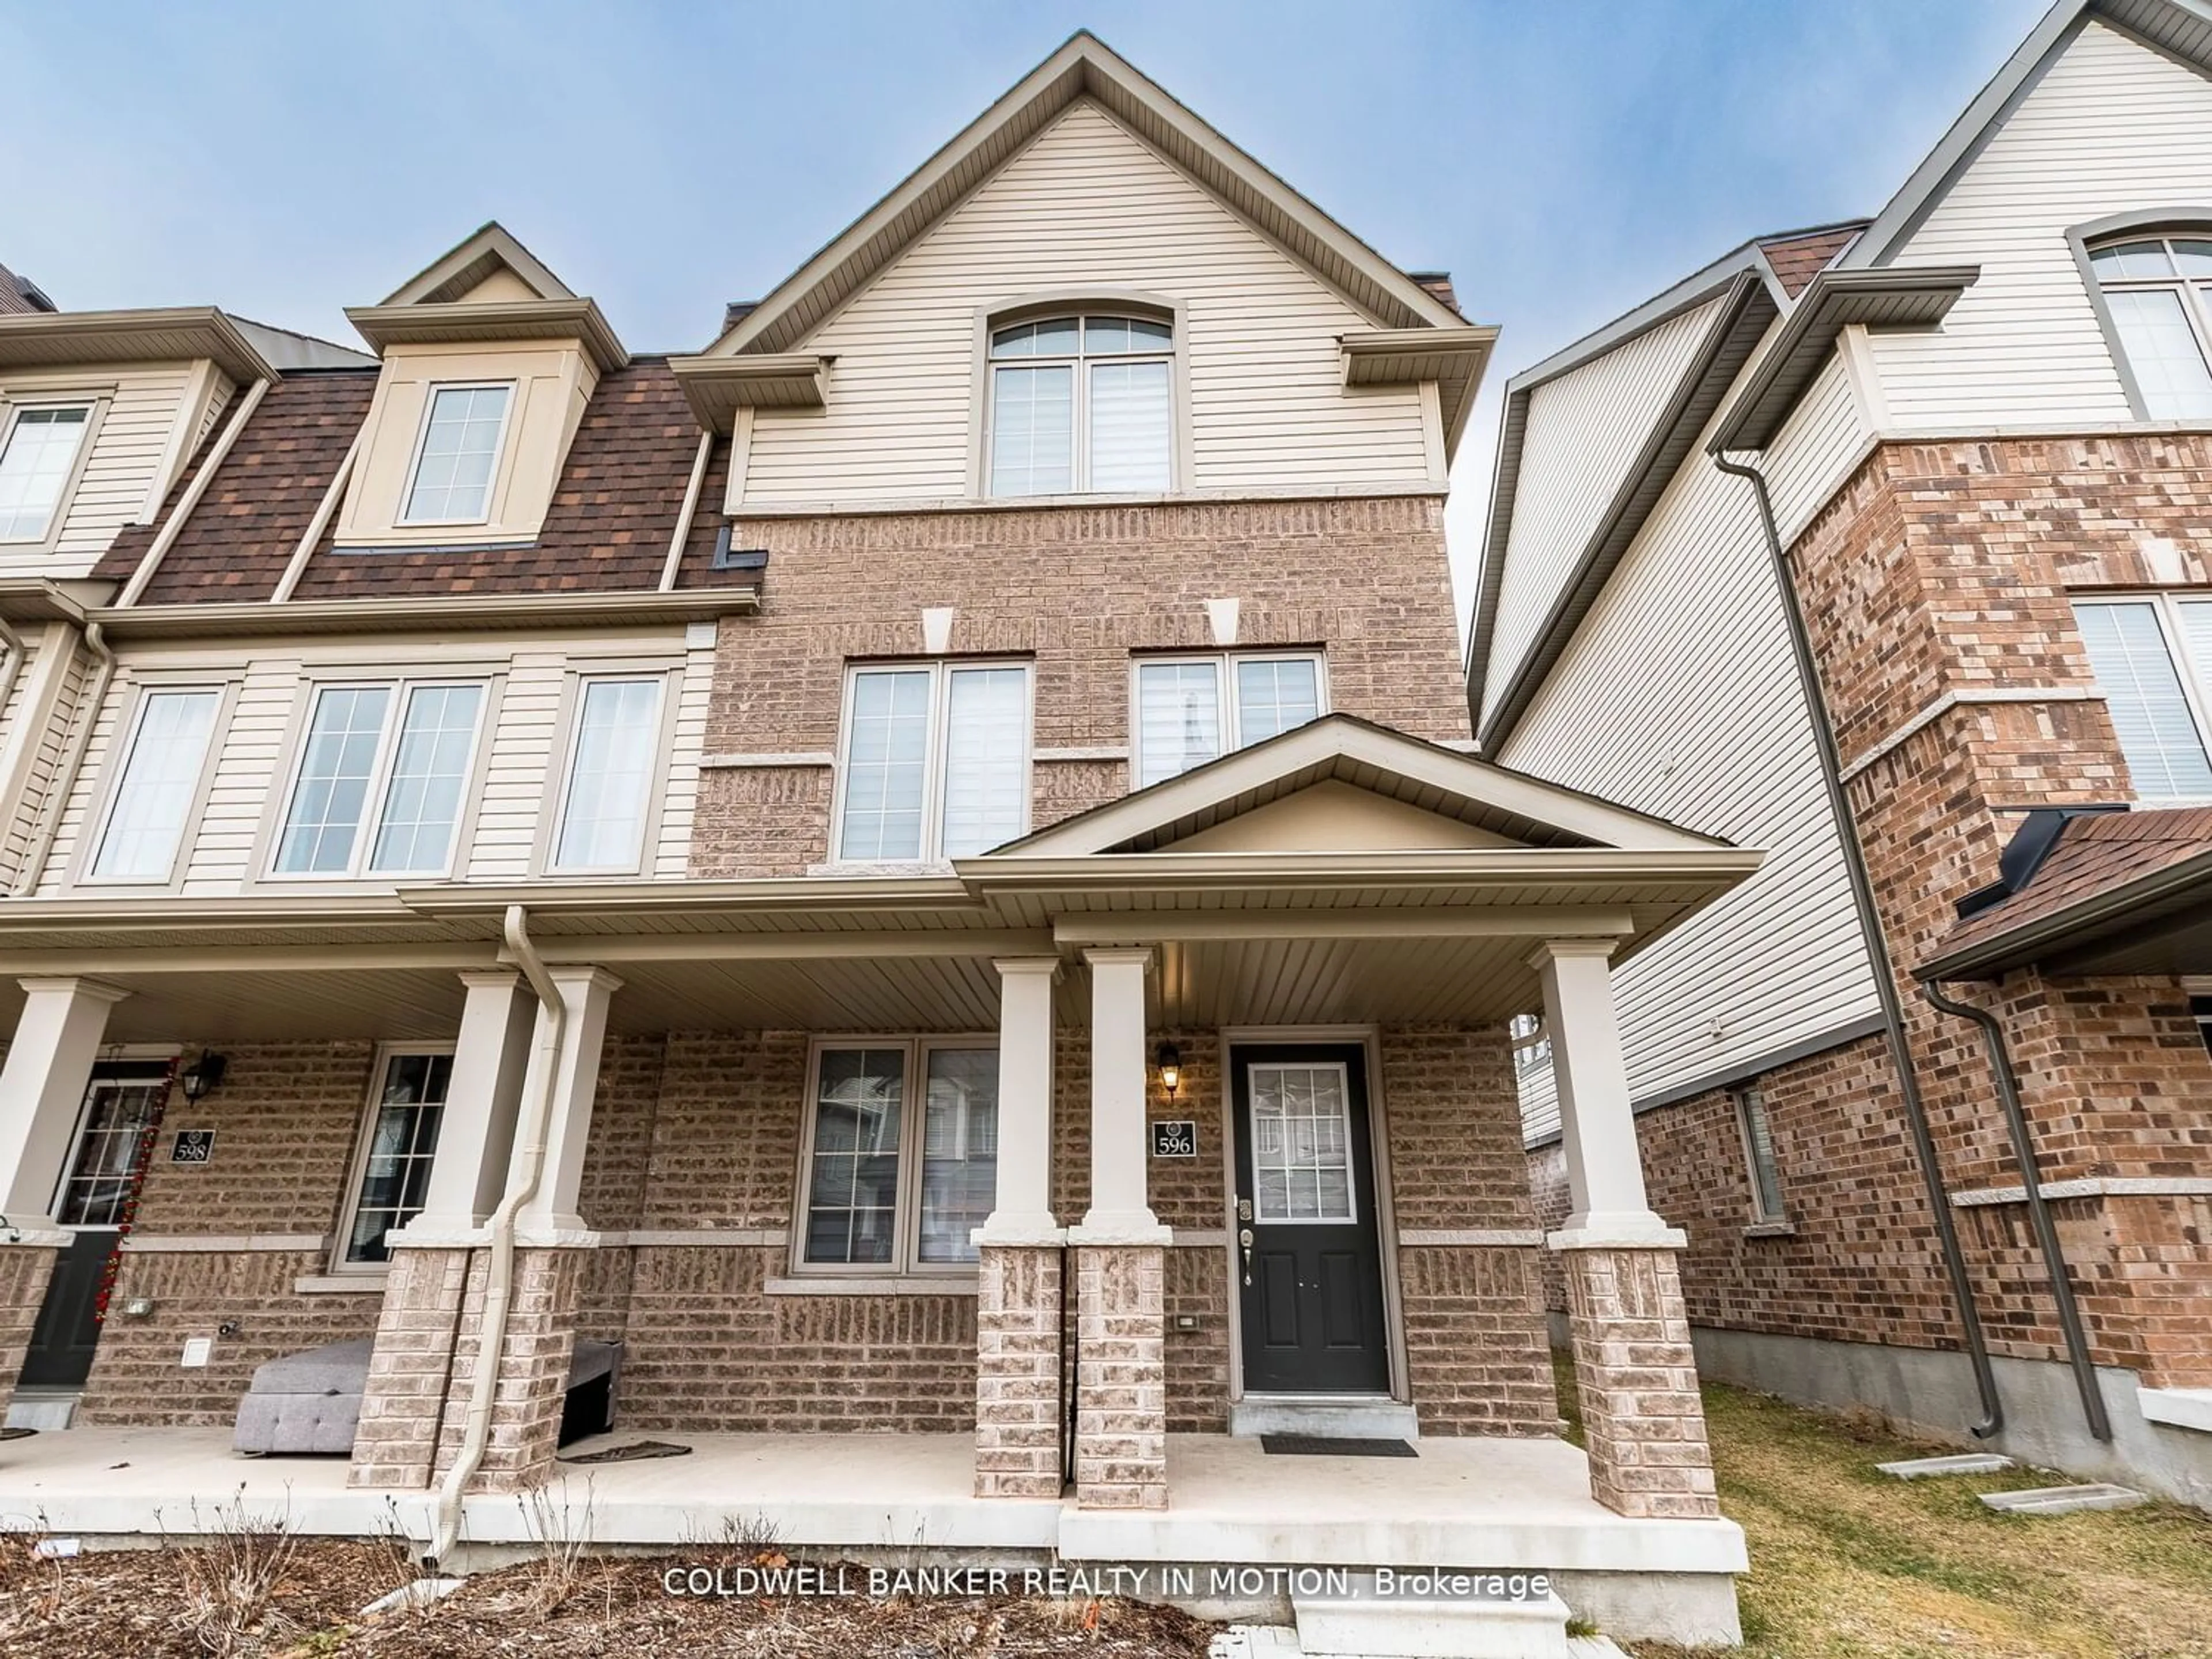 Home with brick exterior material for 596 Linden Dr, Cambridge Ontario N3H 0C9